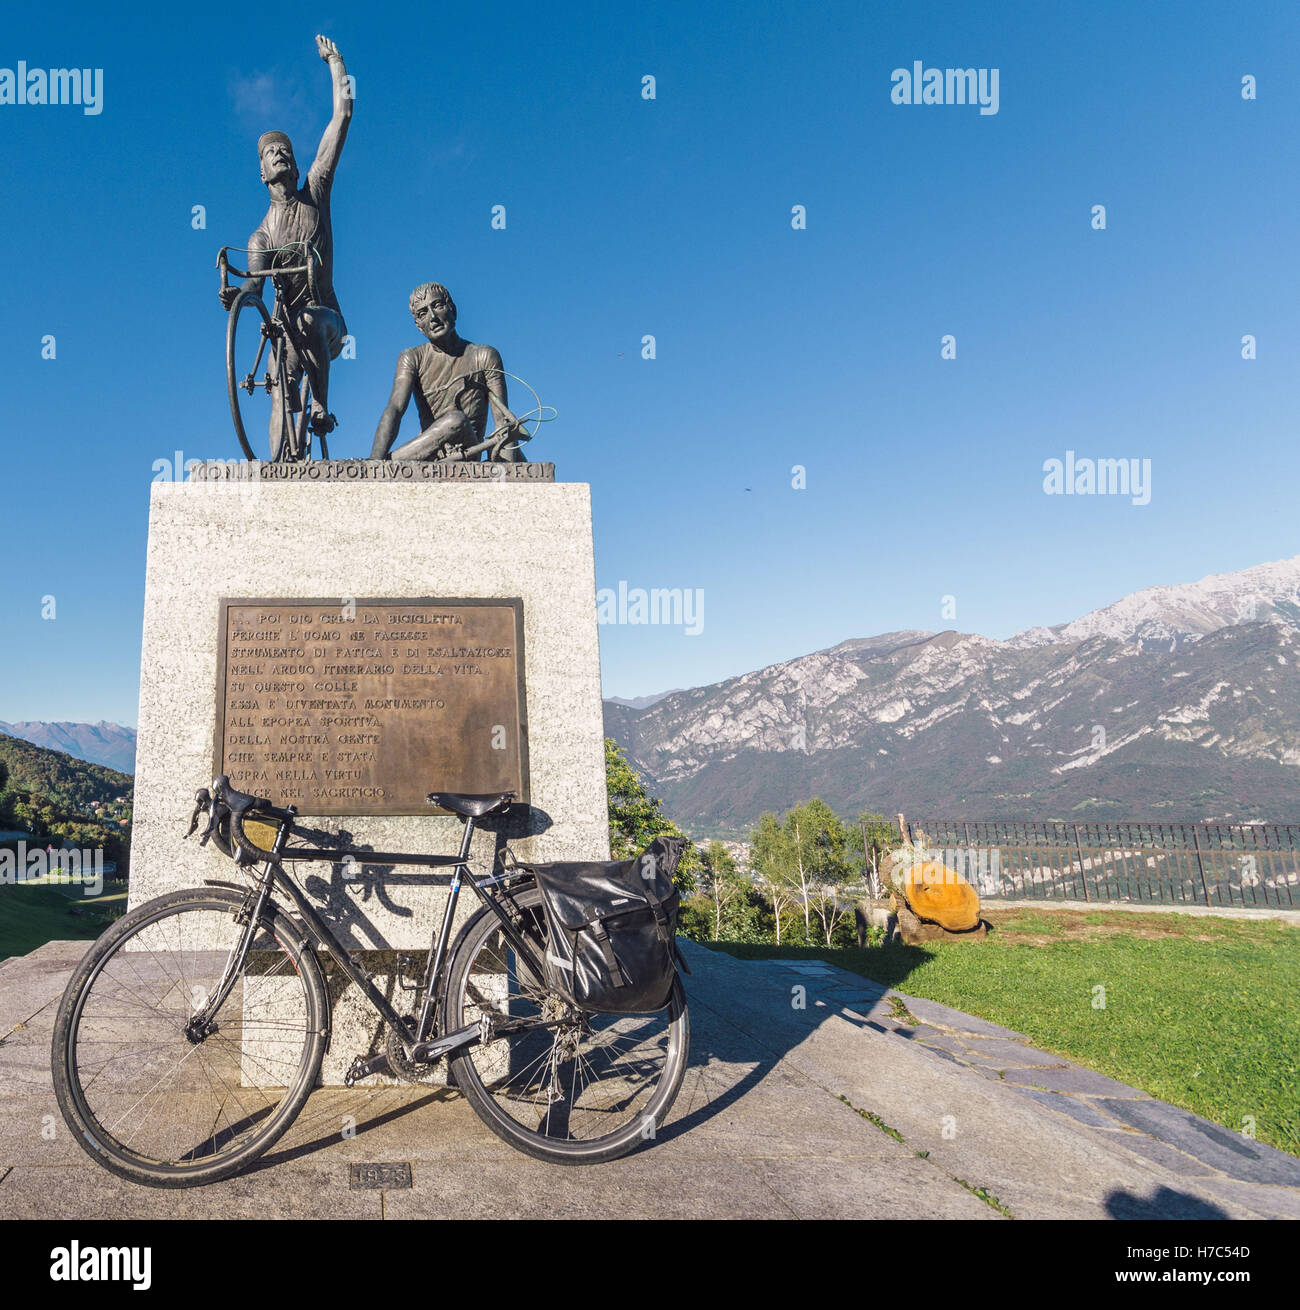 Monument to the cyclist, depicting the victory and fatigue. Stock Photo